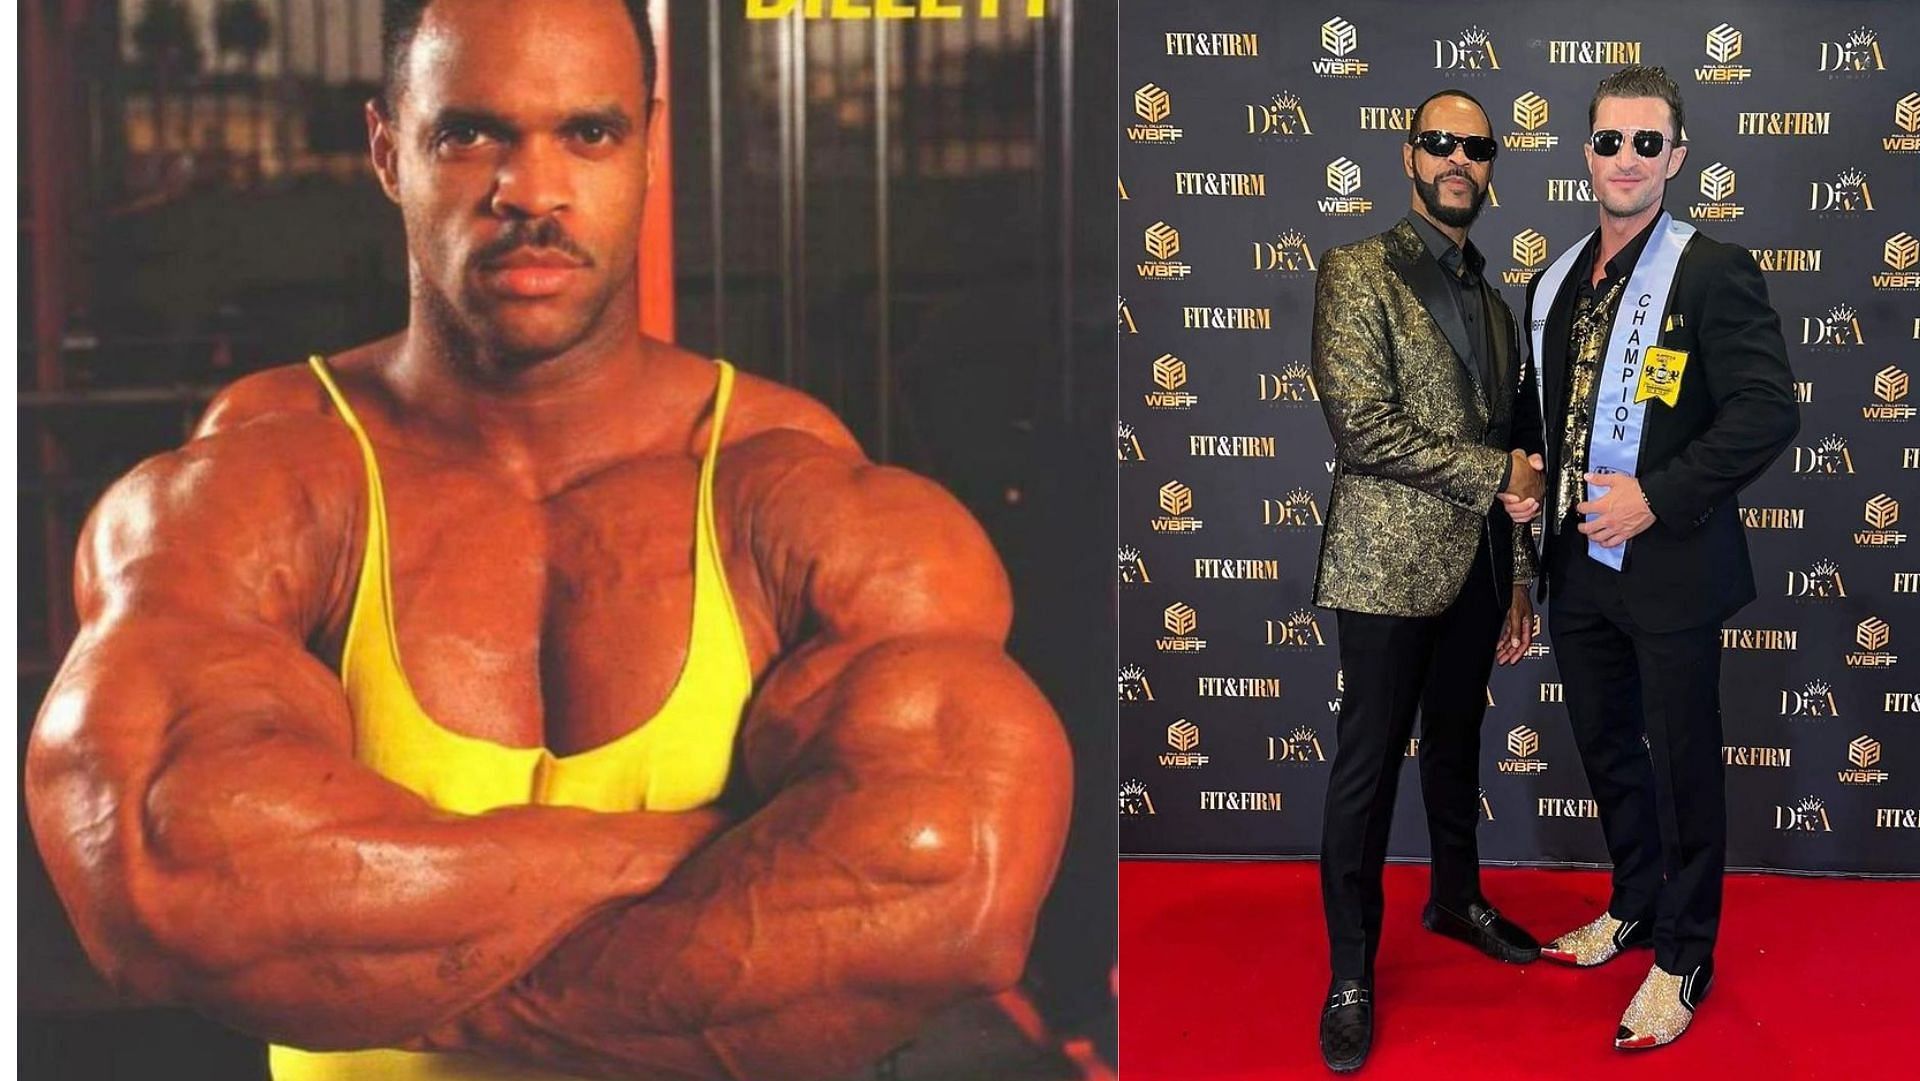 8 Bodybuilders Who Lost All Their Gains